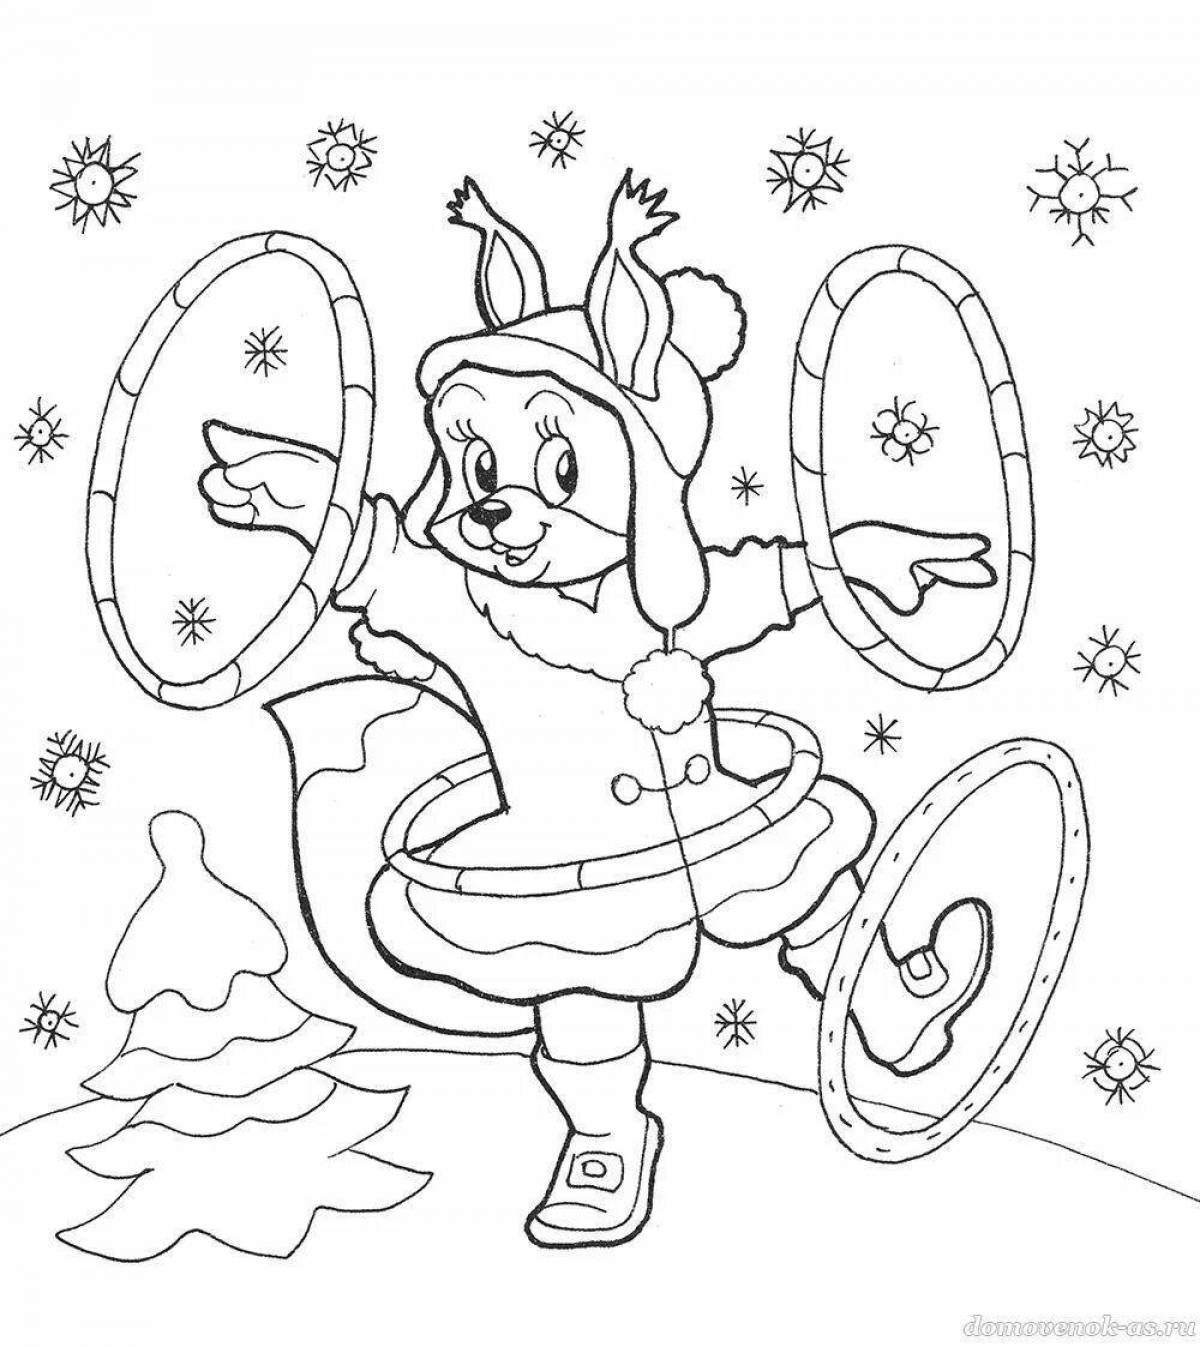 Bright Christmas coloring book for the little ones